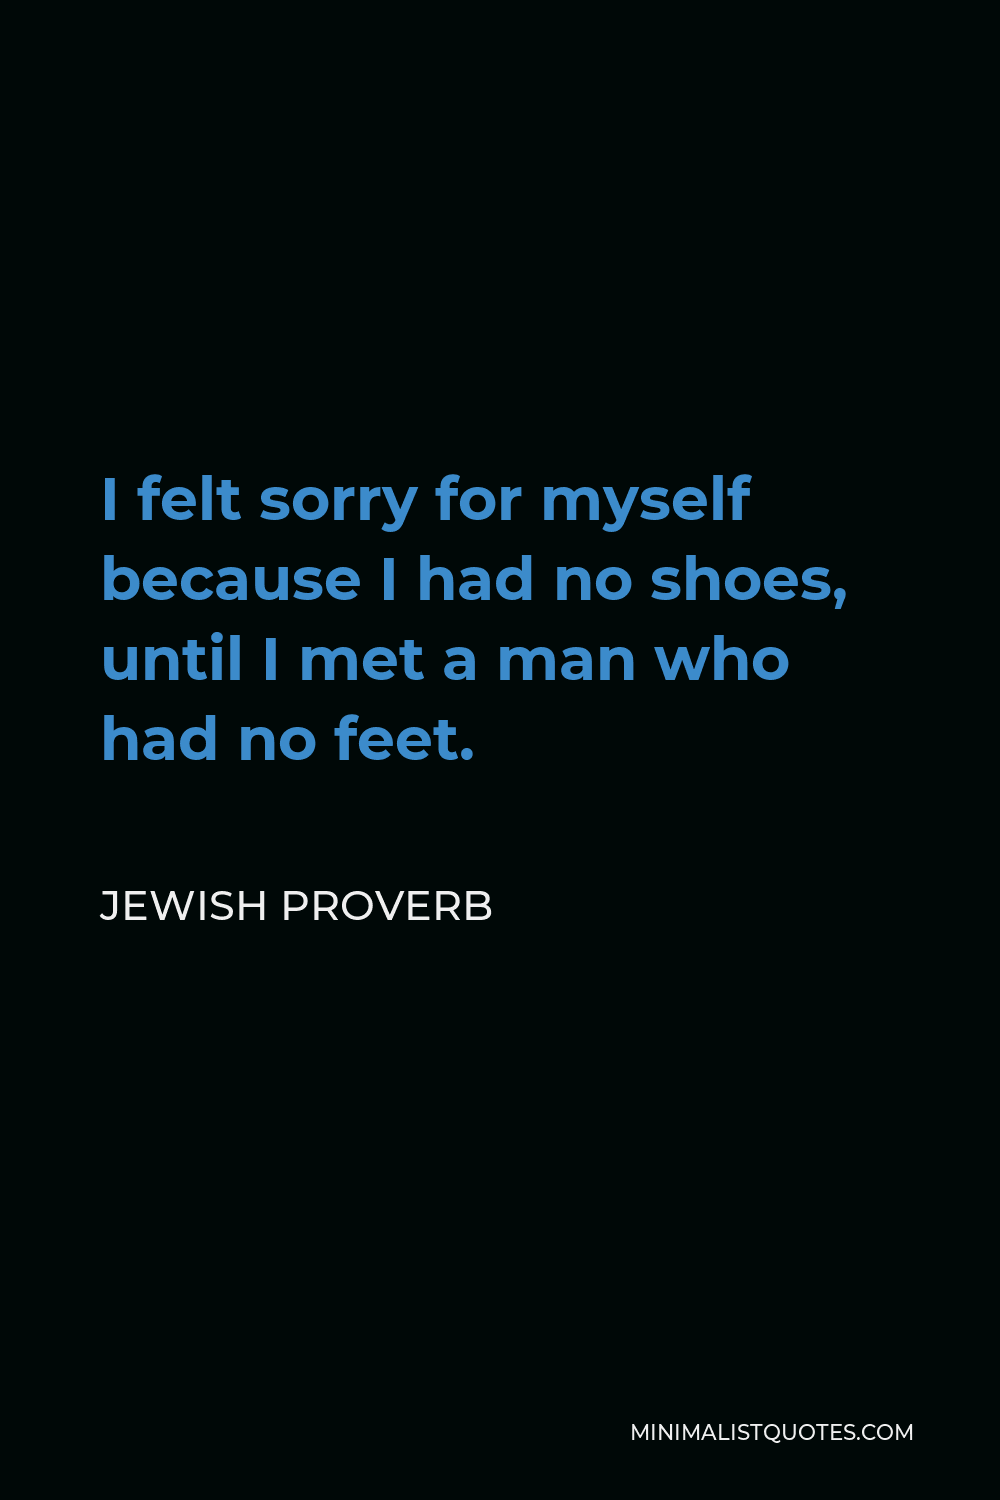 Jewish Proverb Quote - I felt sorry for myself because I had no shoes, until I met a man who had no feet.